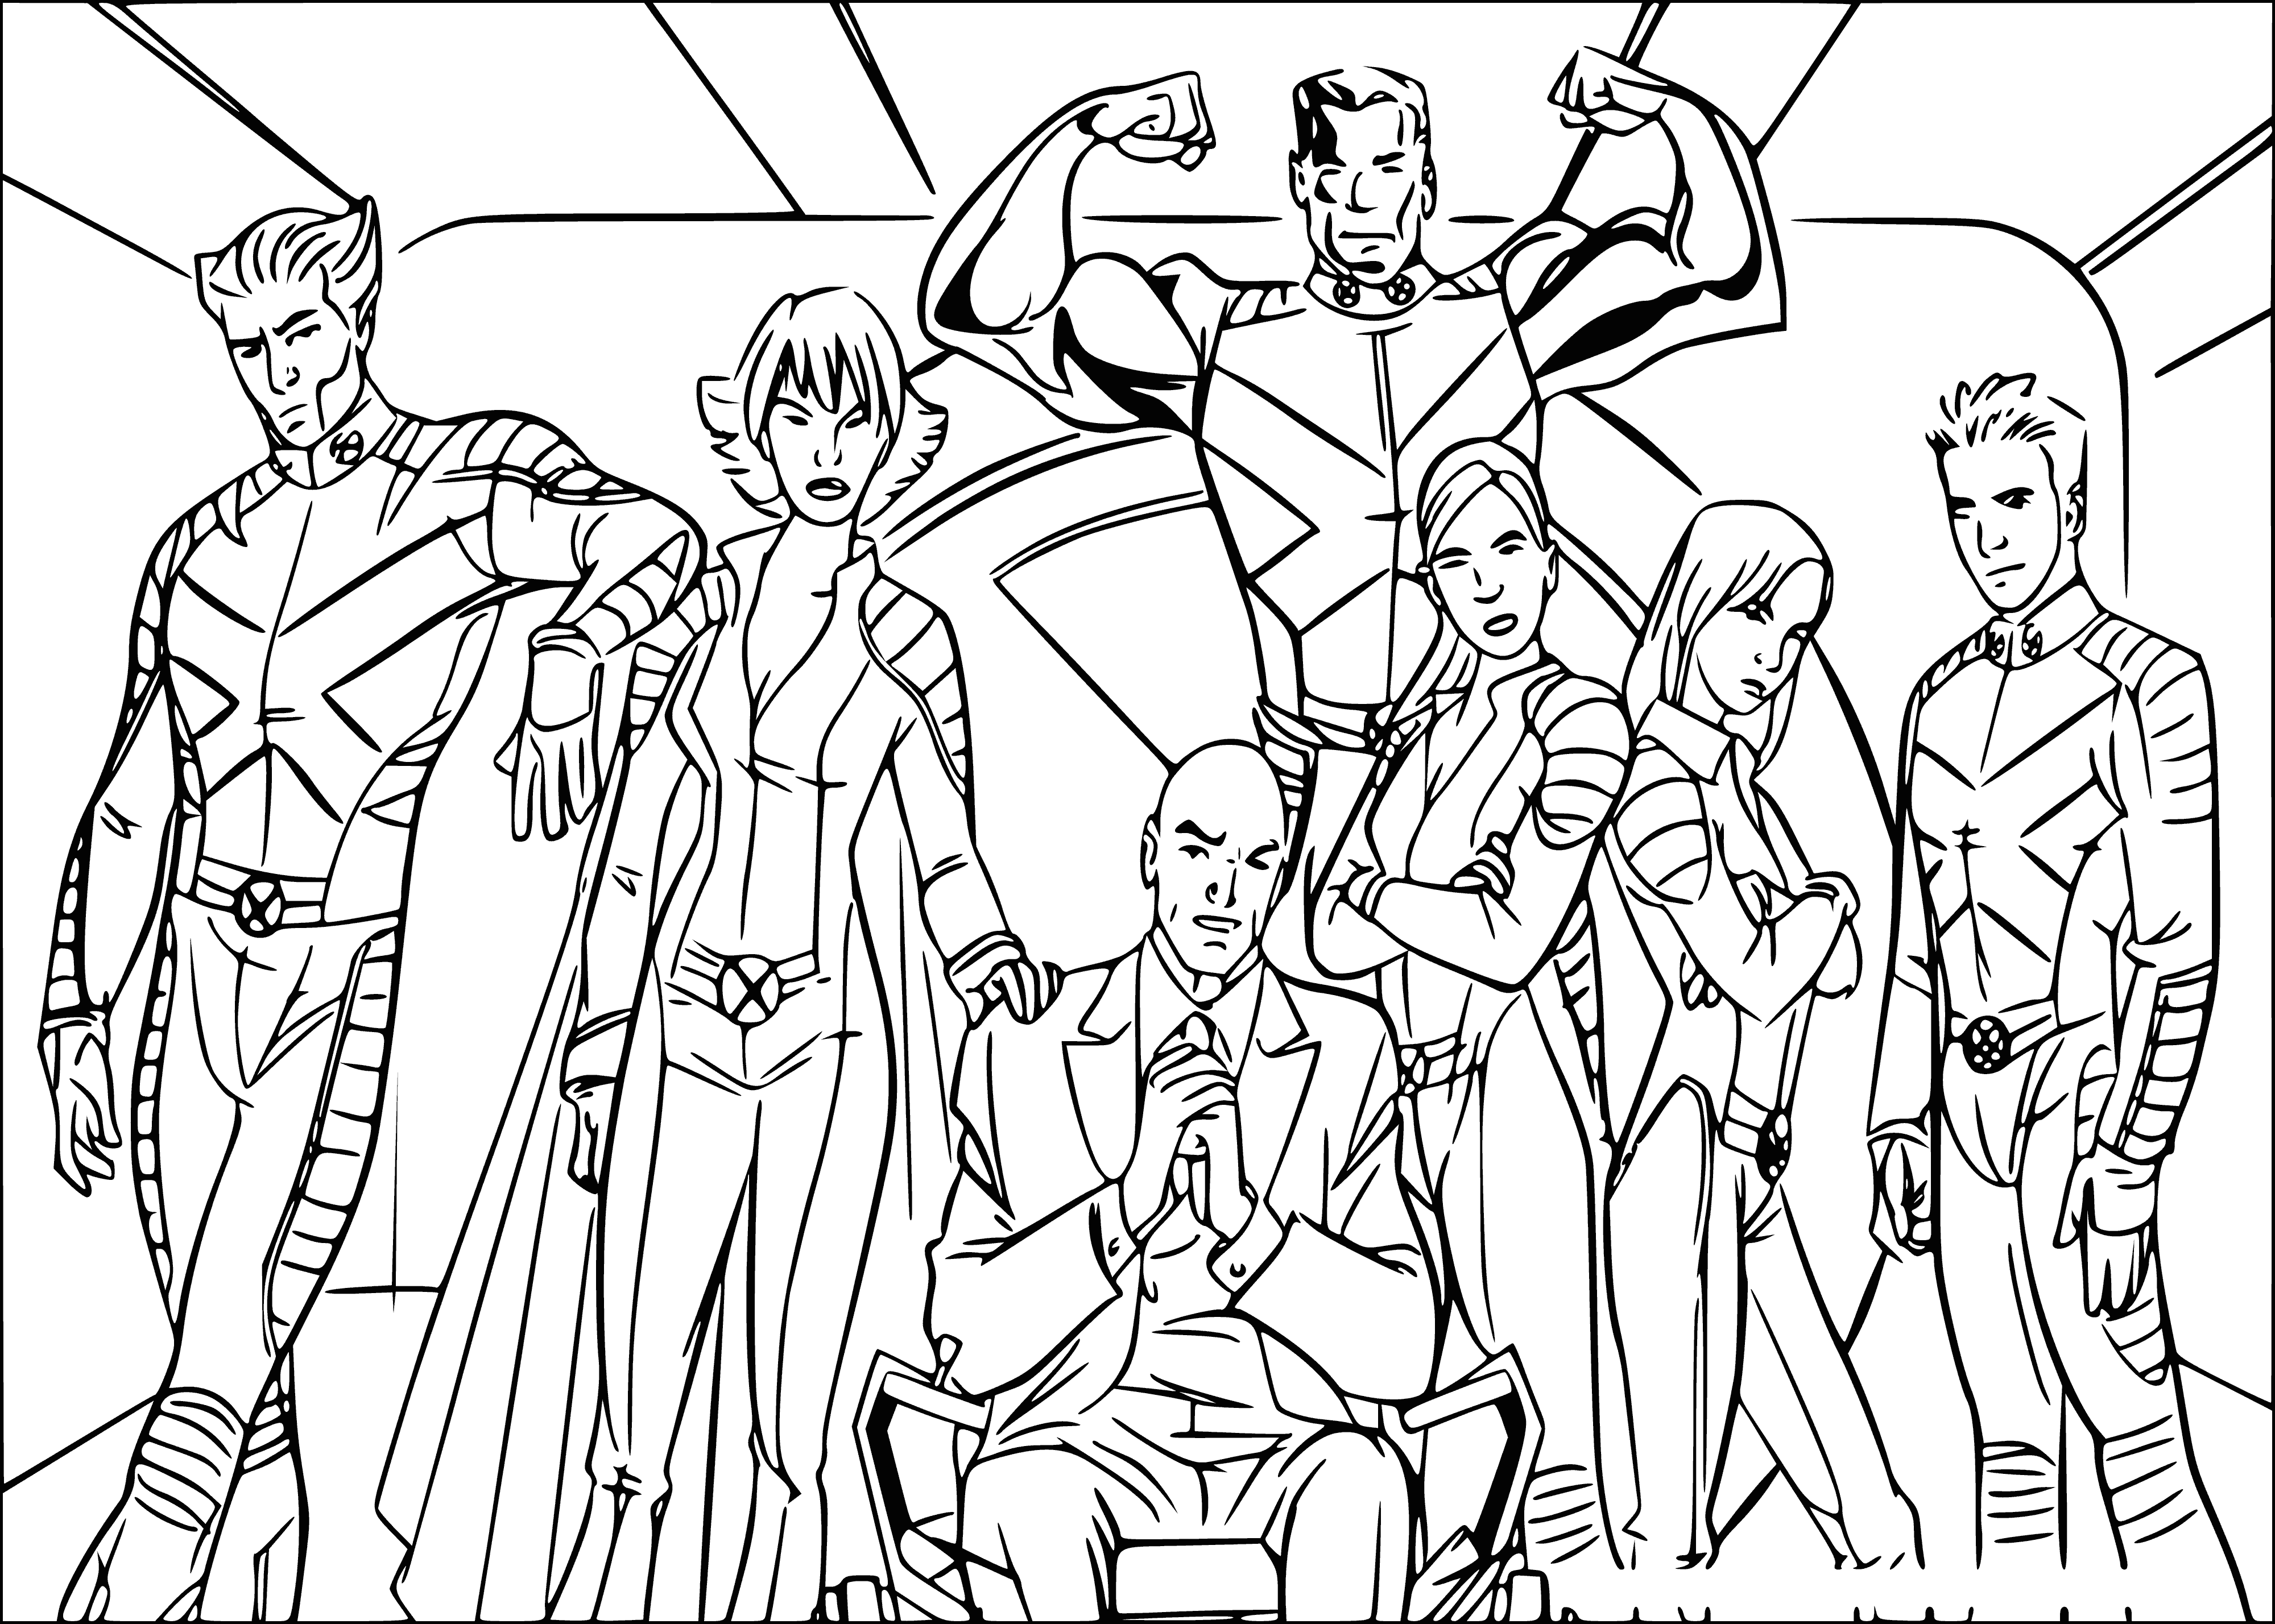 coloring page: Awesome coloring page of people in costumes showcasing their superpowers, ready to fight in a cityscape backdrop. #coloring